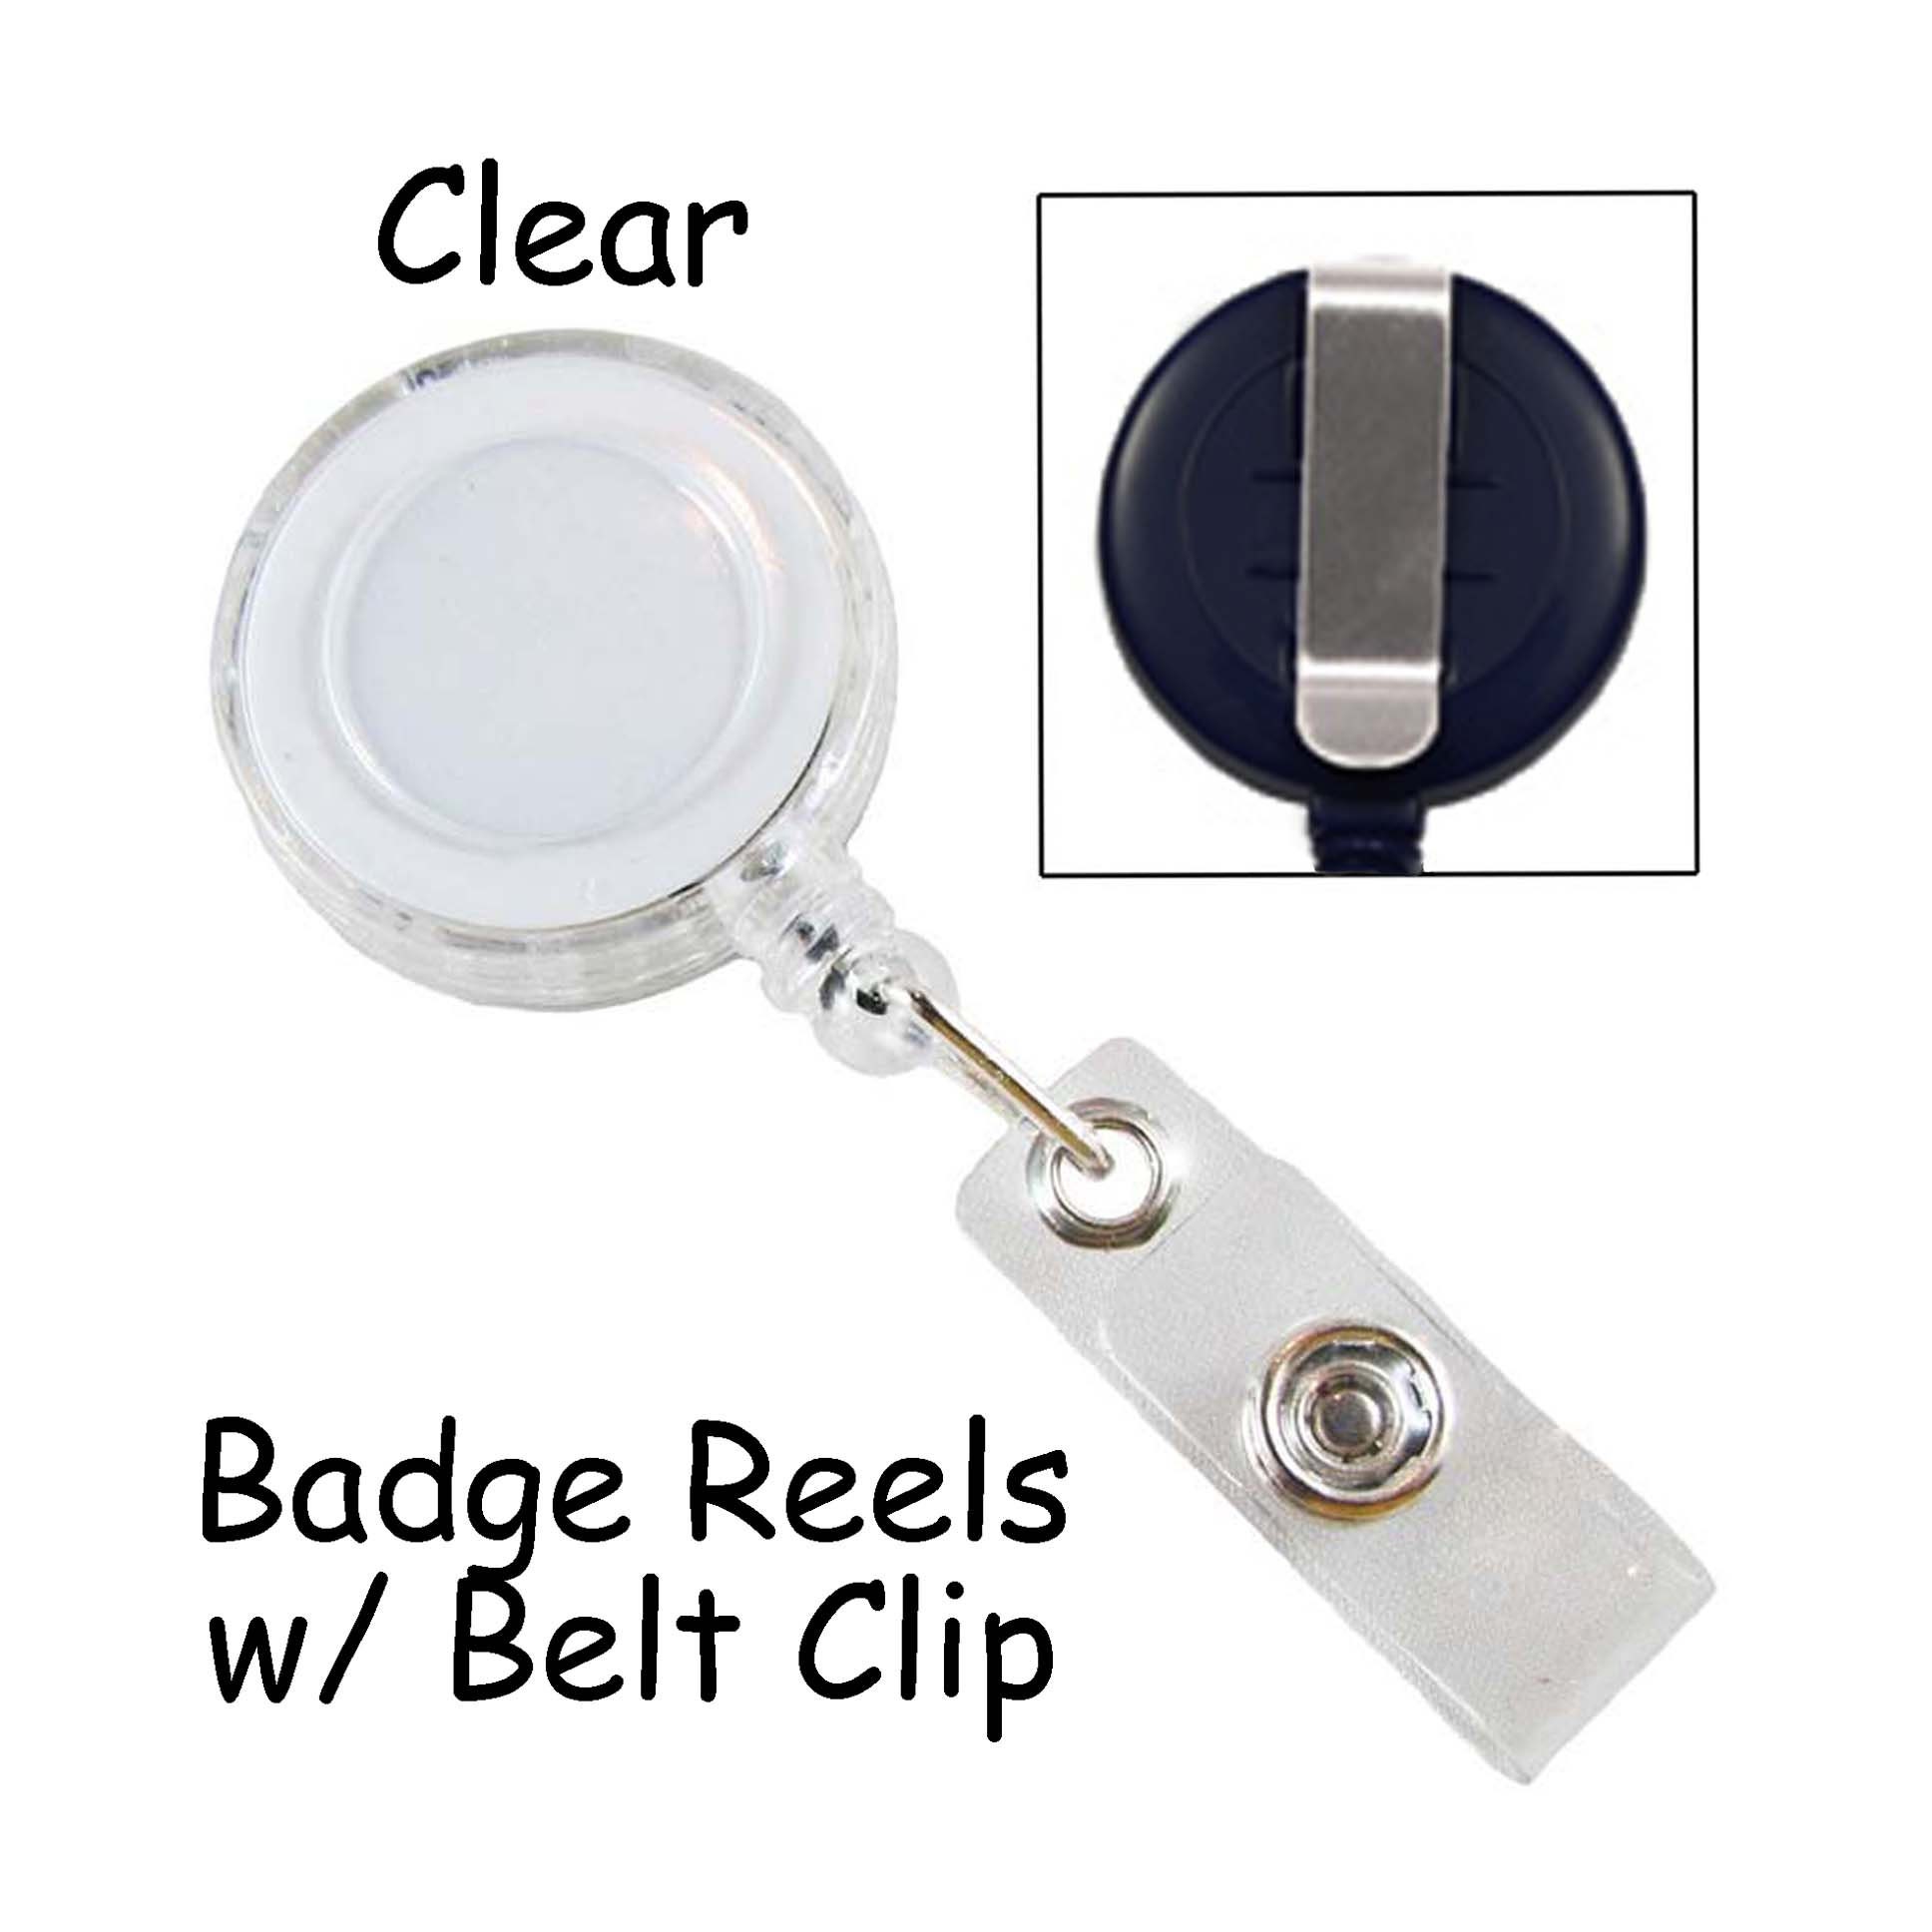 10 Clear ID Badge Reel Lanyard Retractable Cord and Belt Clip SEE COUPON -   Canada